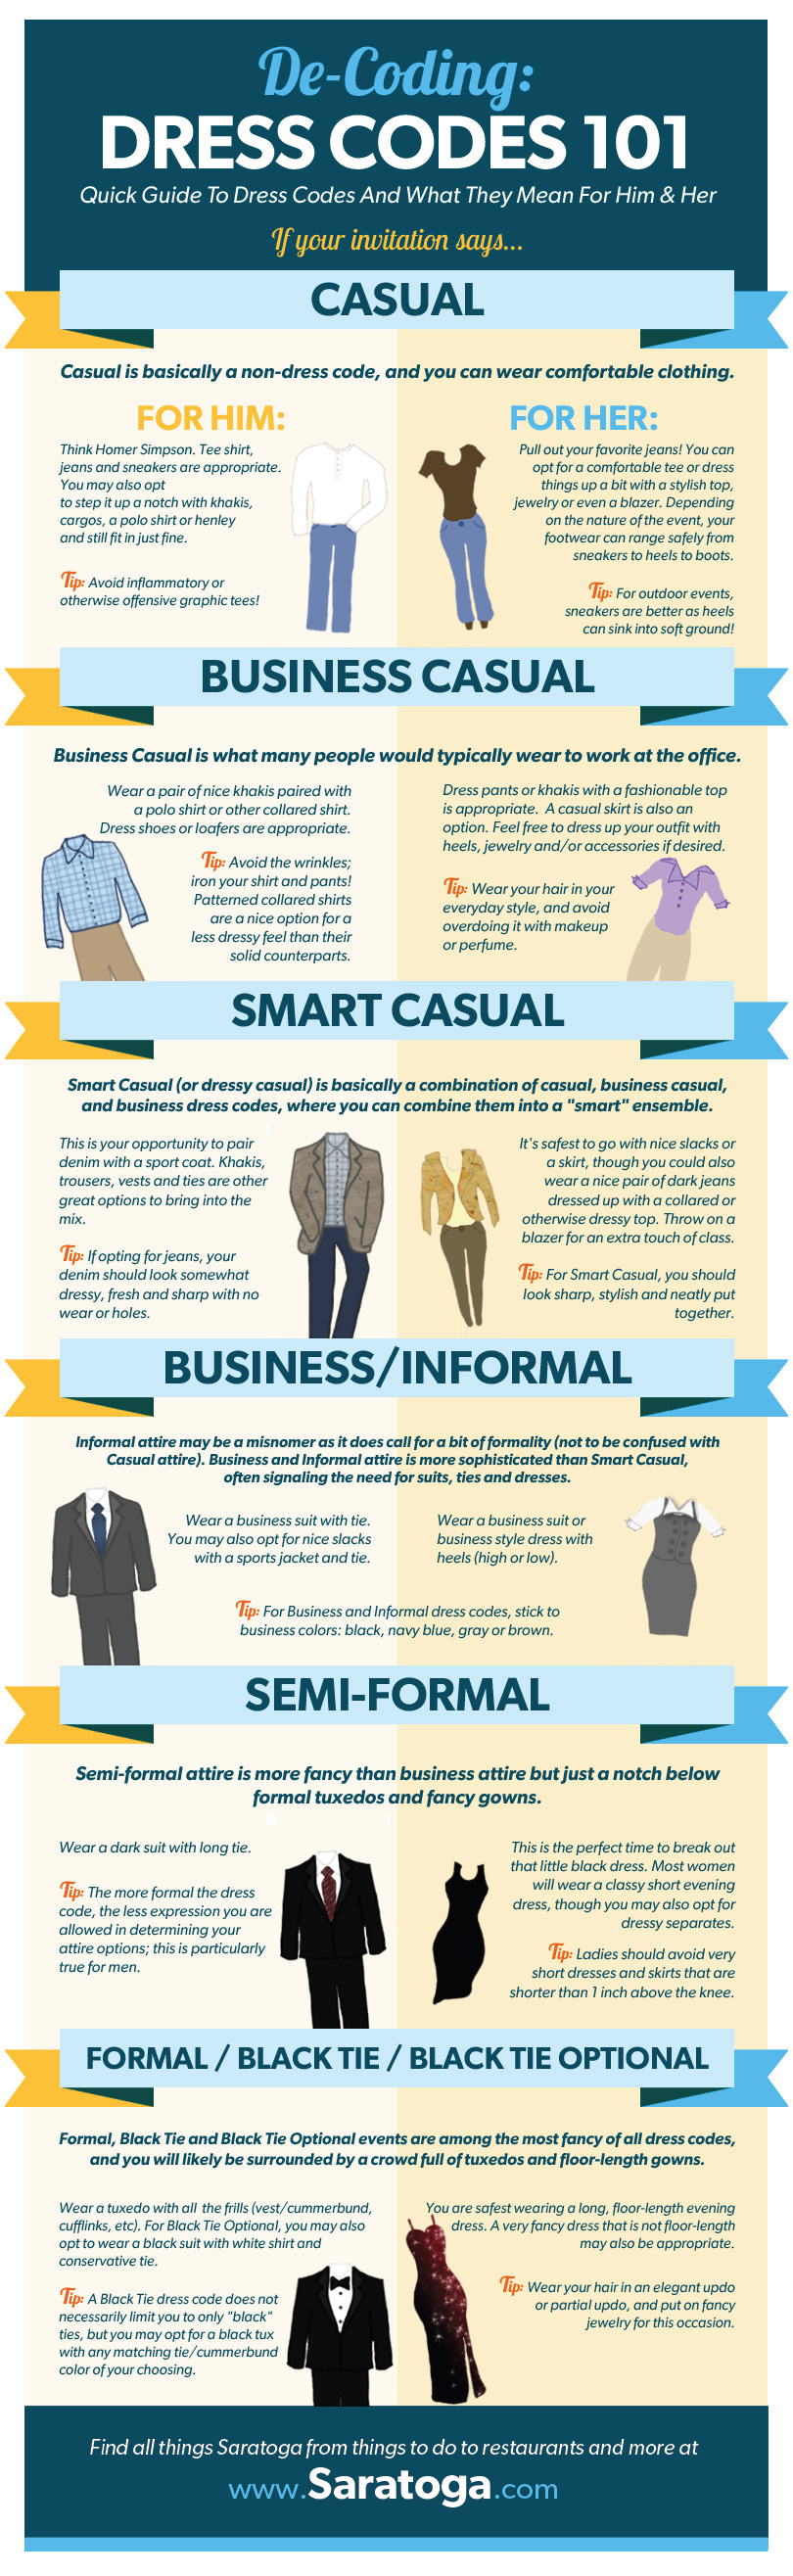 Dress Codes & What They Mean [Infographic] - His & Her Guide To